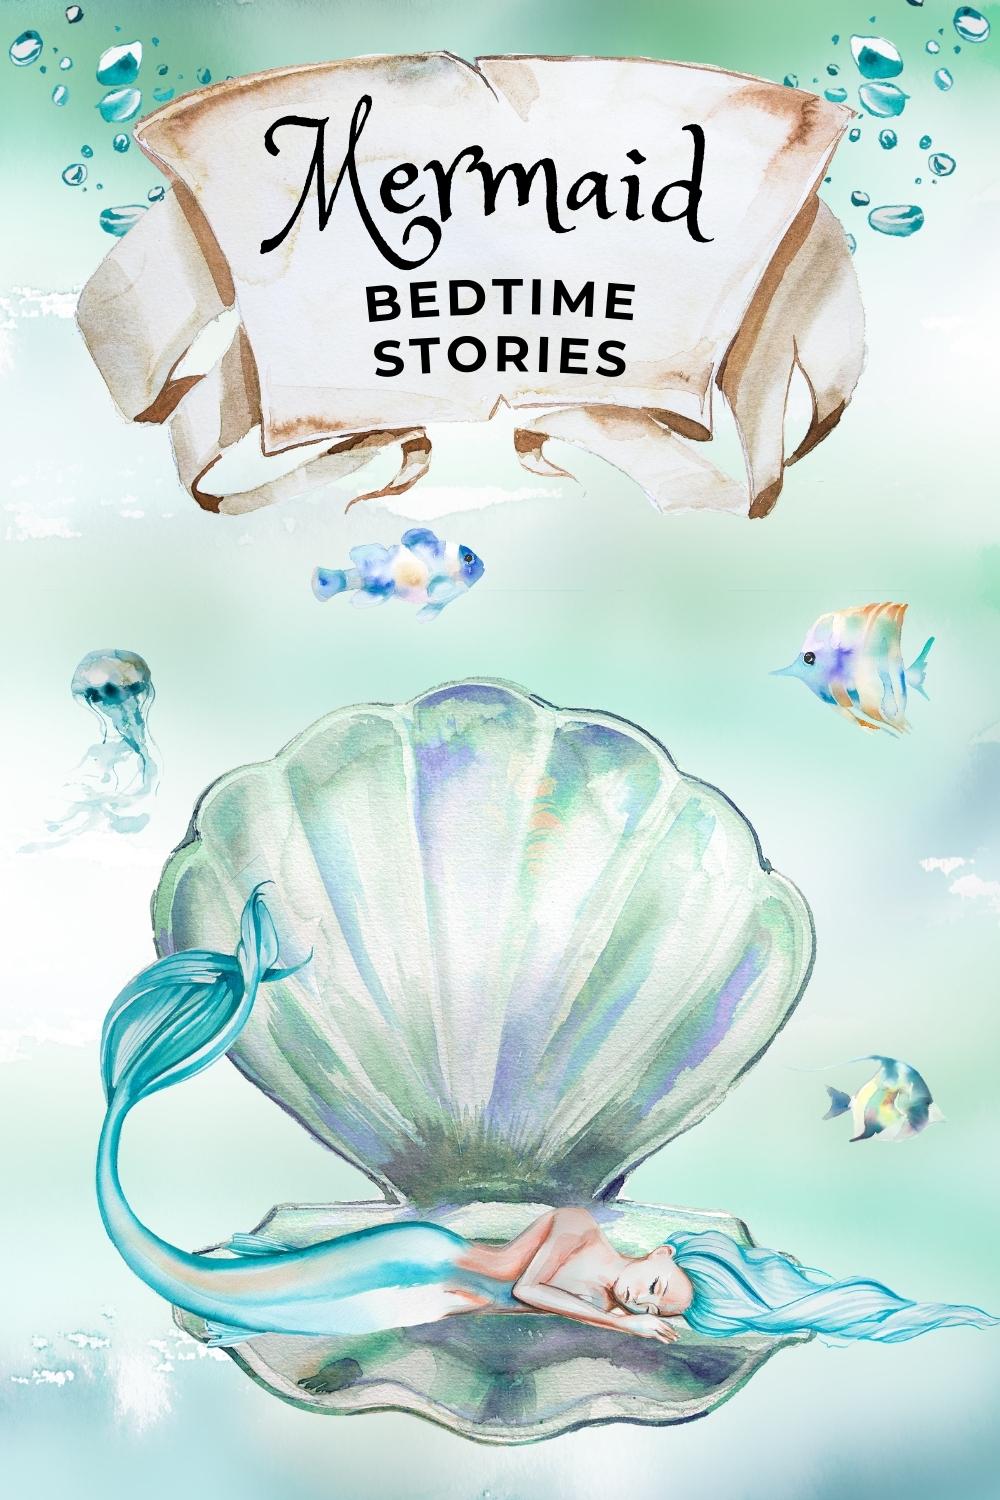 Soothing mermaid bedtime stories to read to your child, or even enjoy yourself!